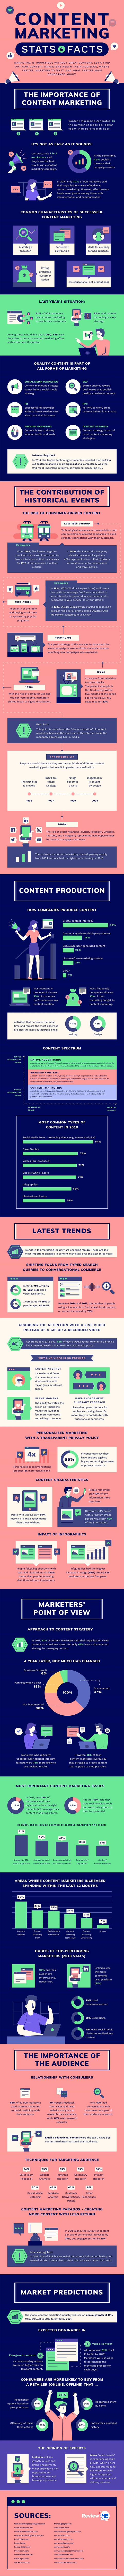 Content Marketing Stats & Facts infographic